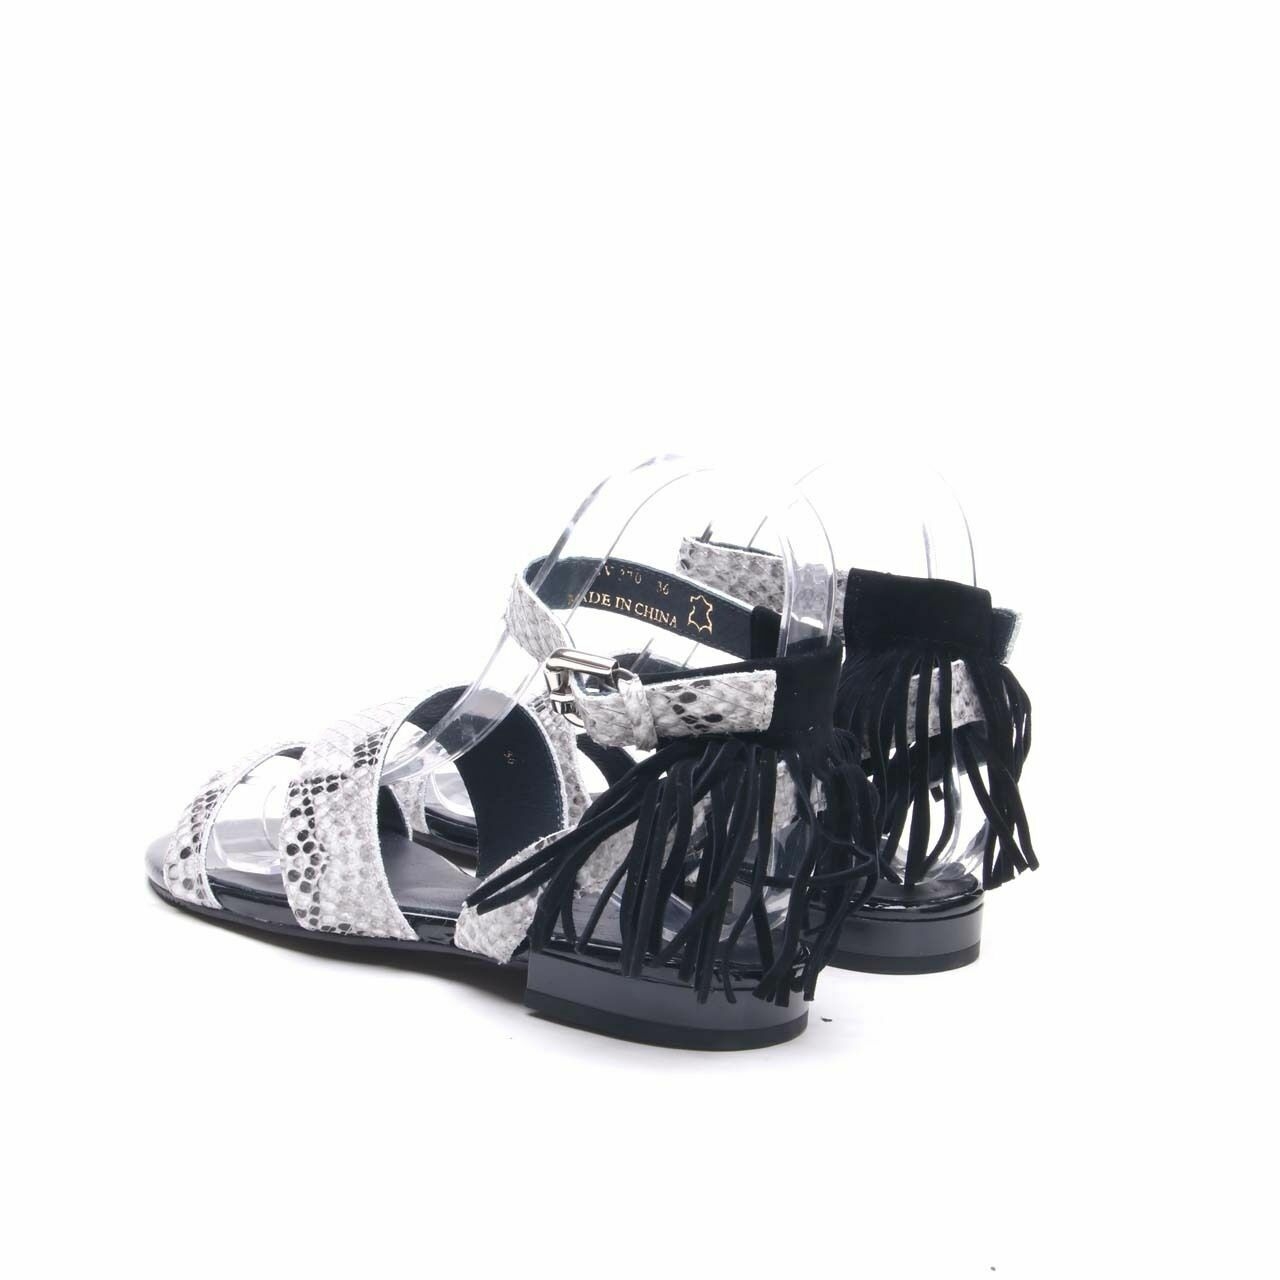 Staccato Black & Grey Sandals